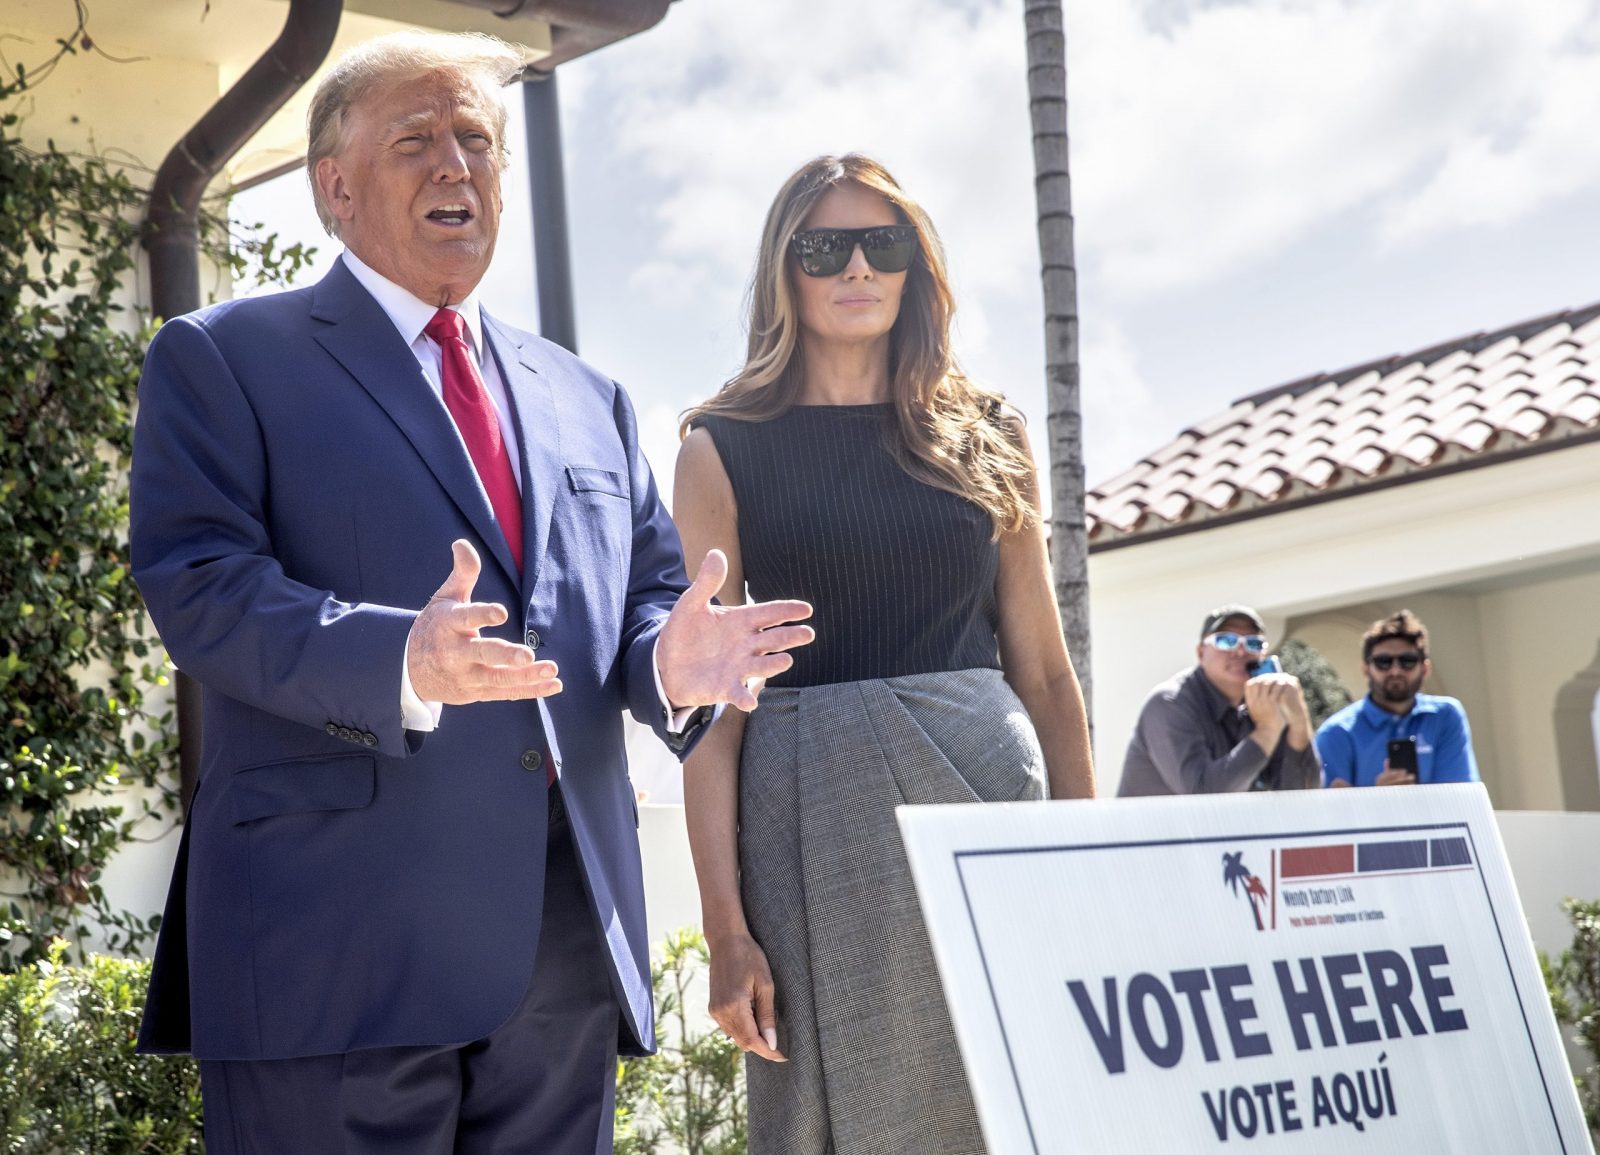 epa10294157 Former US President Donald J. Trump (L) and former First Lady Melania Trump (R), walk out of the electoral precinct after voting in-person at the Morton and Barbara Mandel Recreation Center in Palm Beach, Florida, USA, 08 October 2022. The US midterm elections are held every four years at the midpoint of each presidential term and this year include elections for all 435 seats in the House of Representatives, 35 of the 100 seats in the Senate and 36 of the 50 state governors as well as numerous other local seats and ballot issues.  EPA/CRISTOBAL HERRERA-ULASHKEVICH